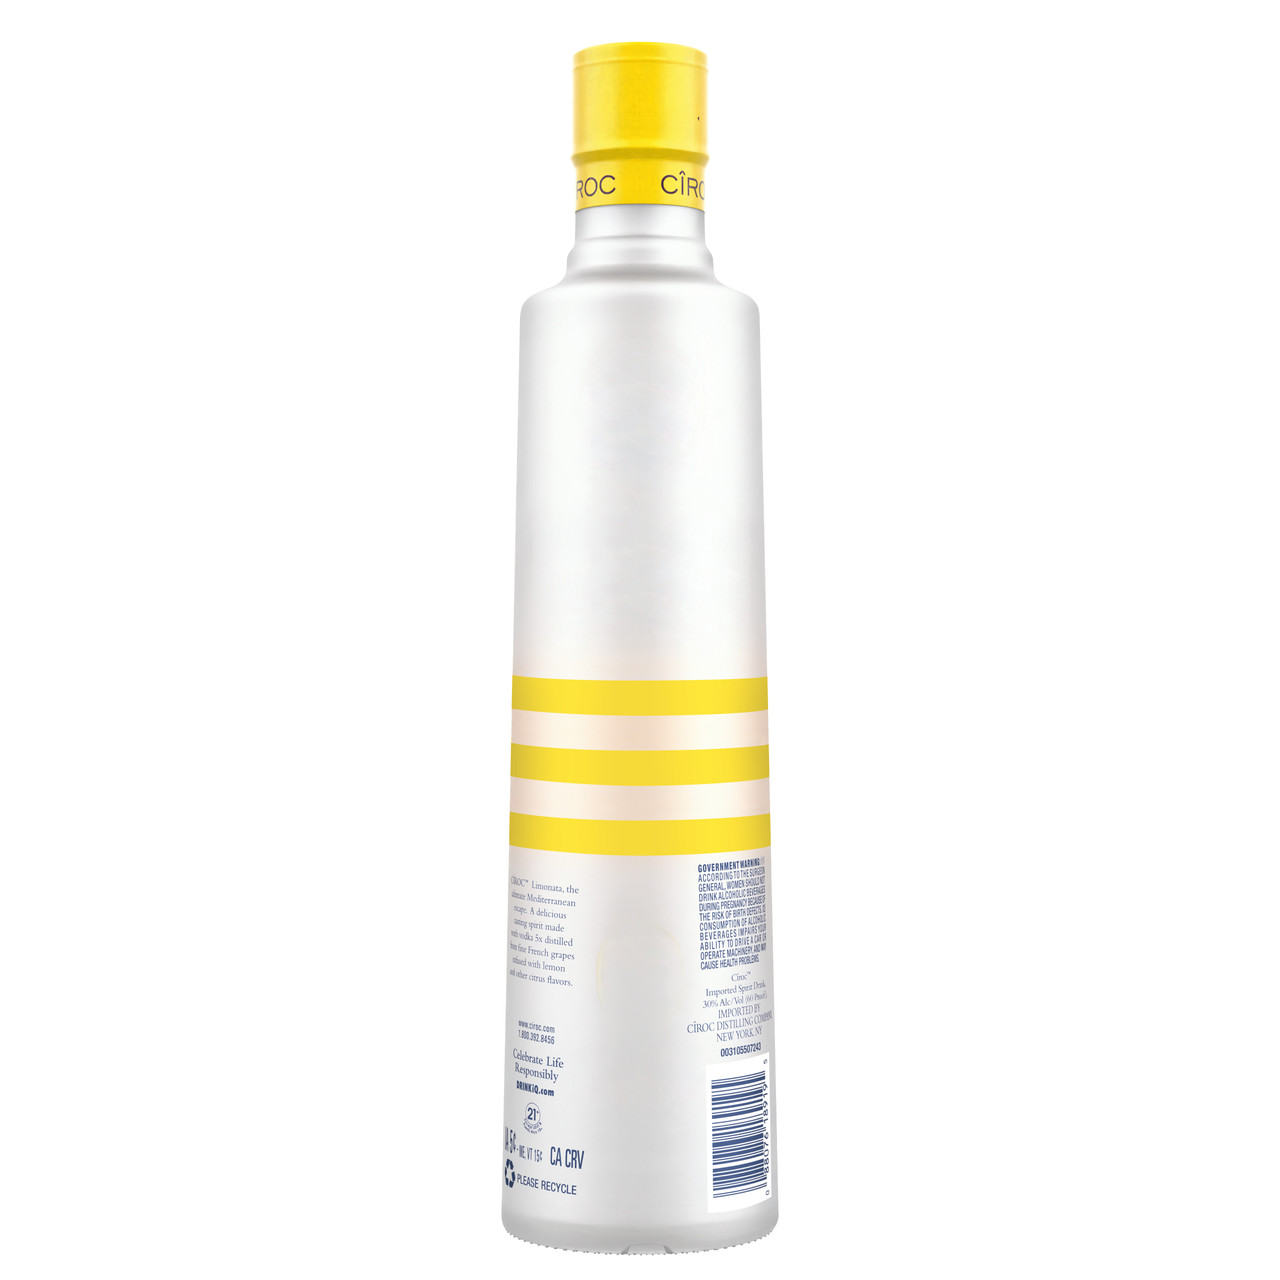 *3PACK* Ciroc Passion Limited Edition 750ml